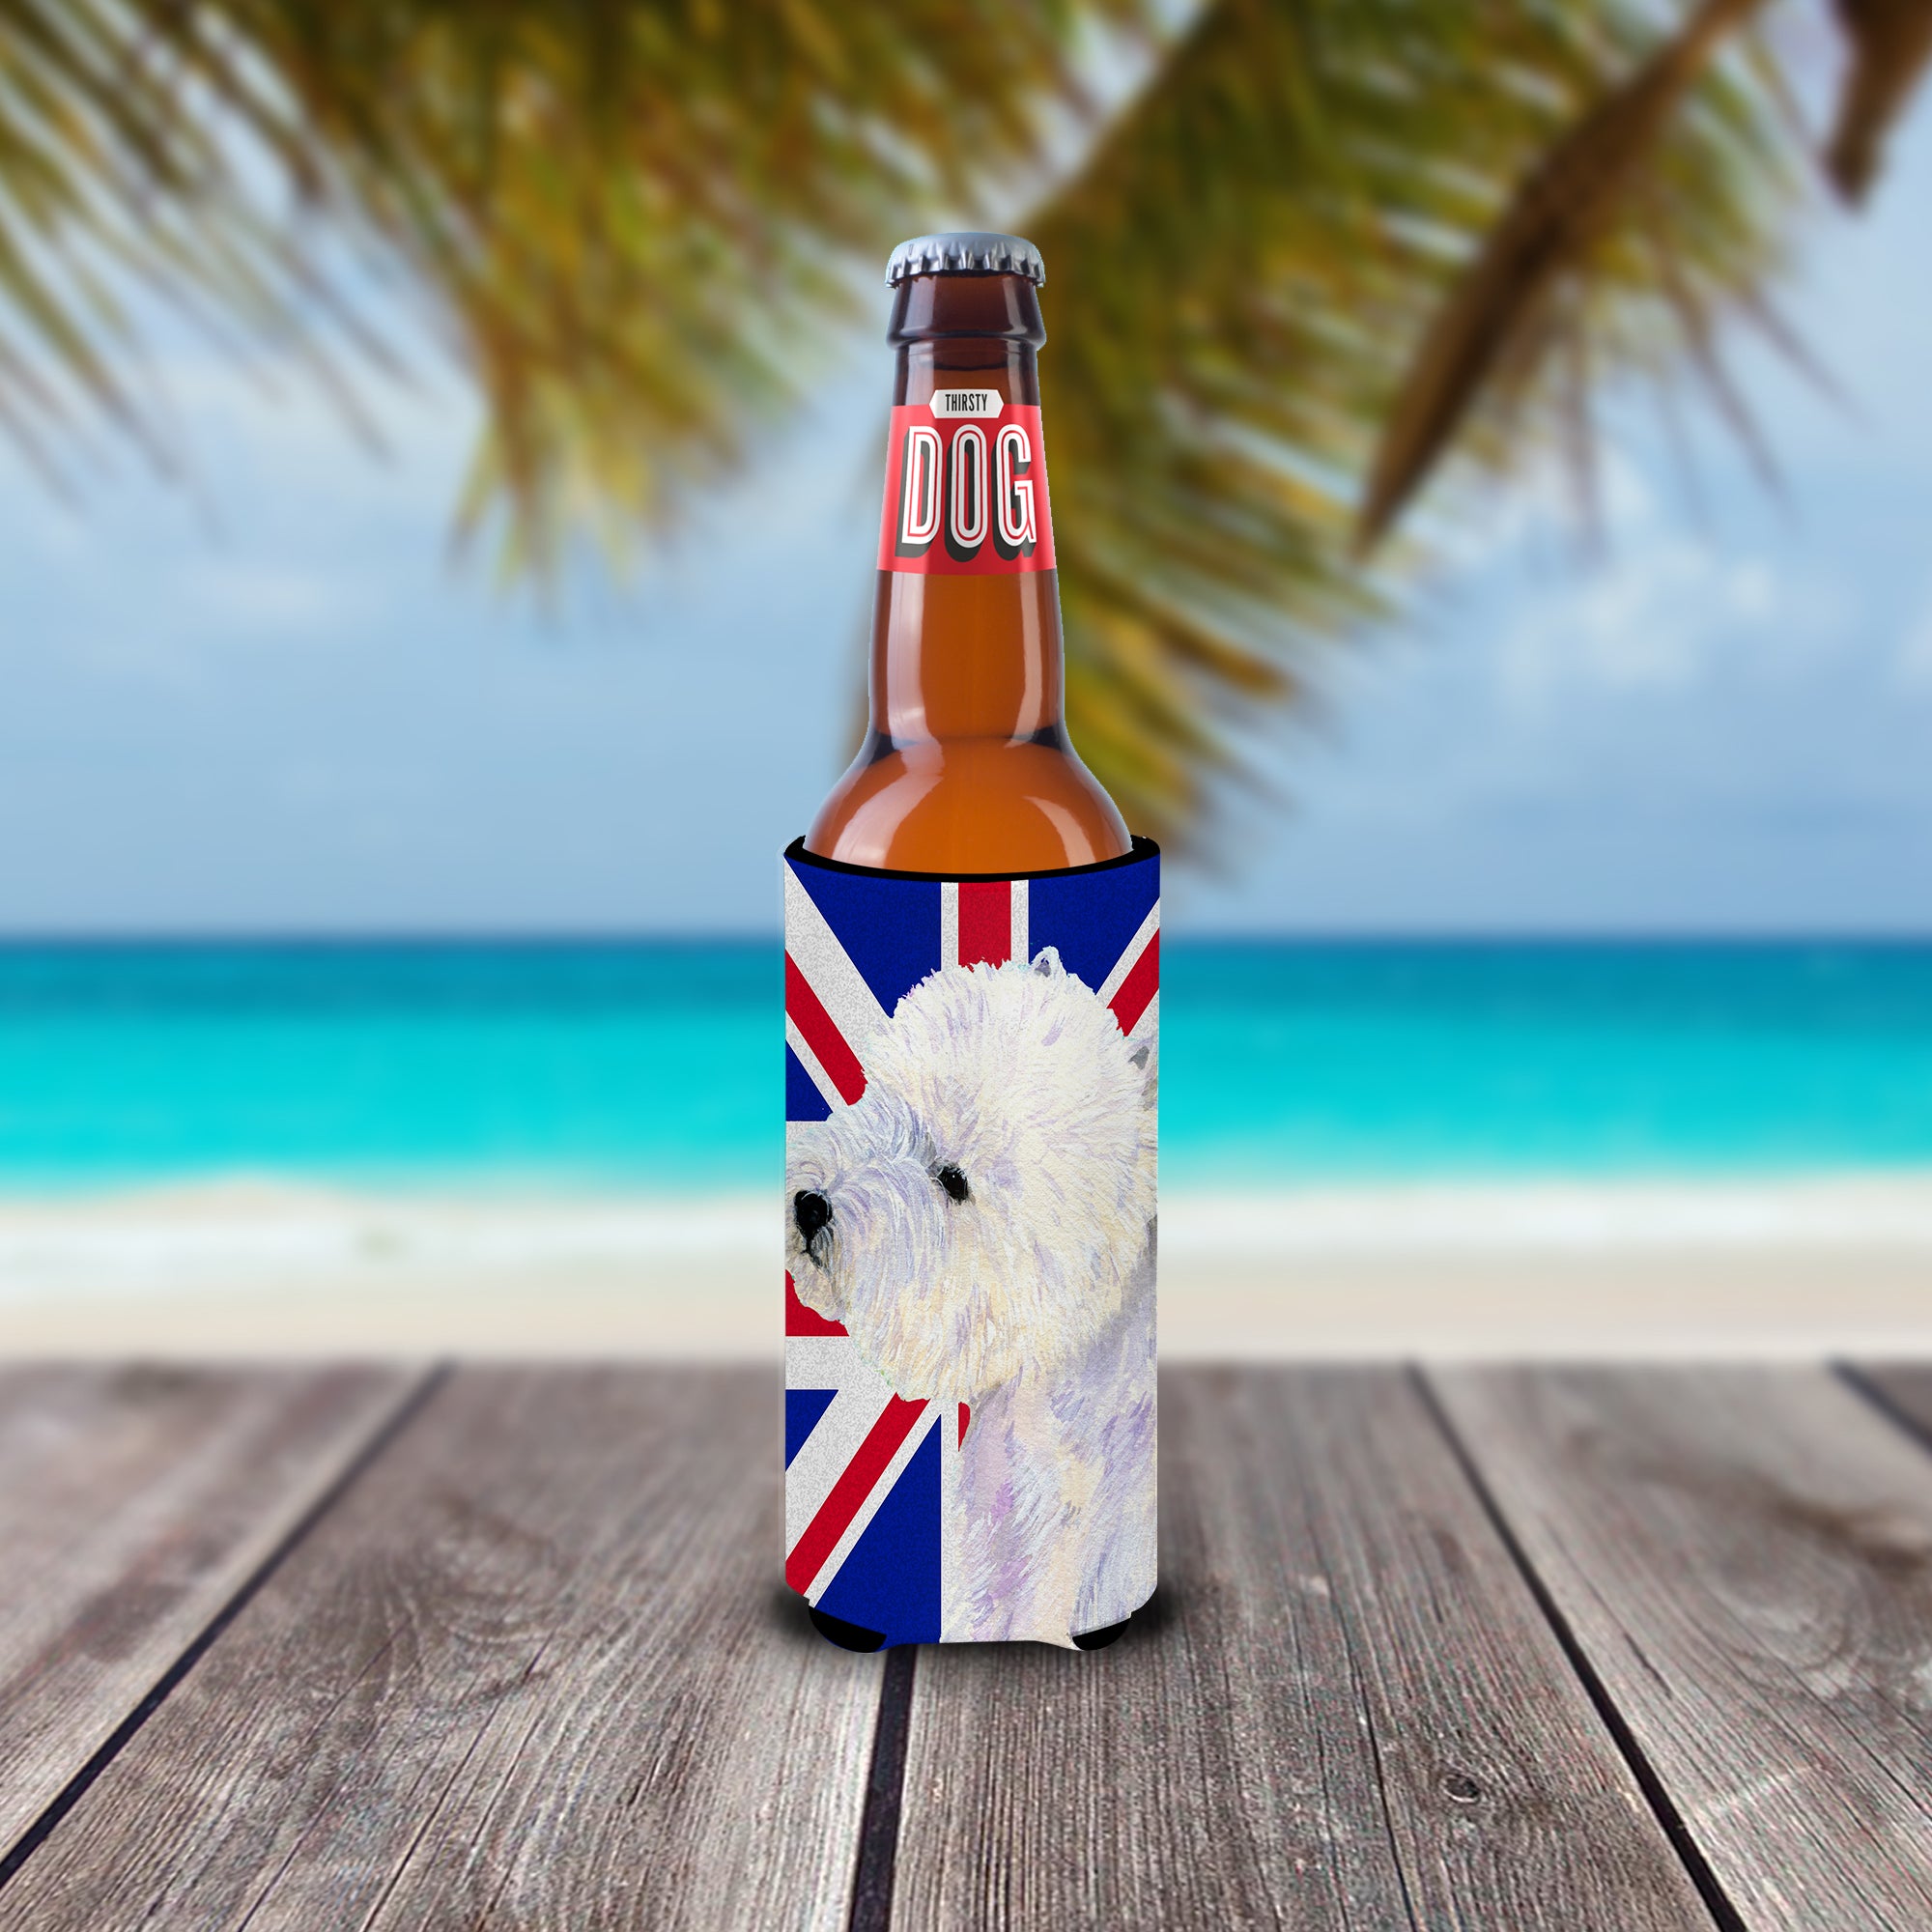 Westie with English Union Jack British Flag Ultra Beverage Insulators for slim cans LH9467MUK.